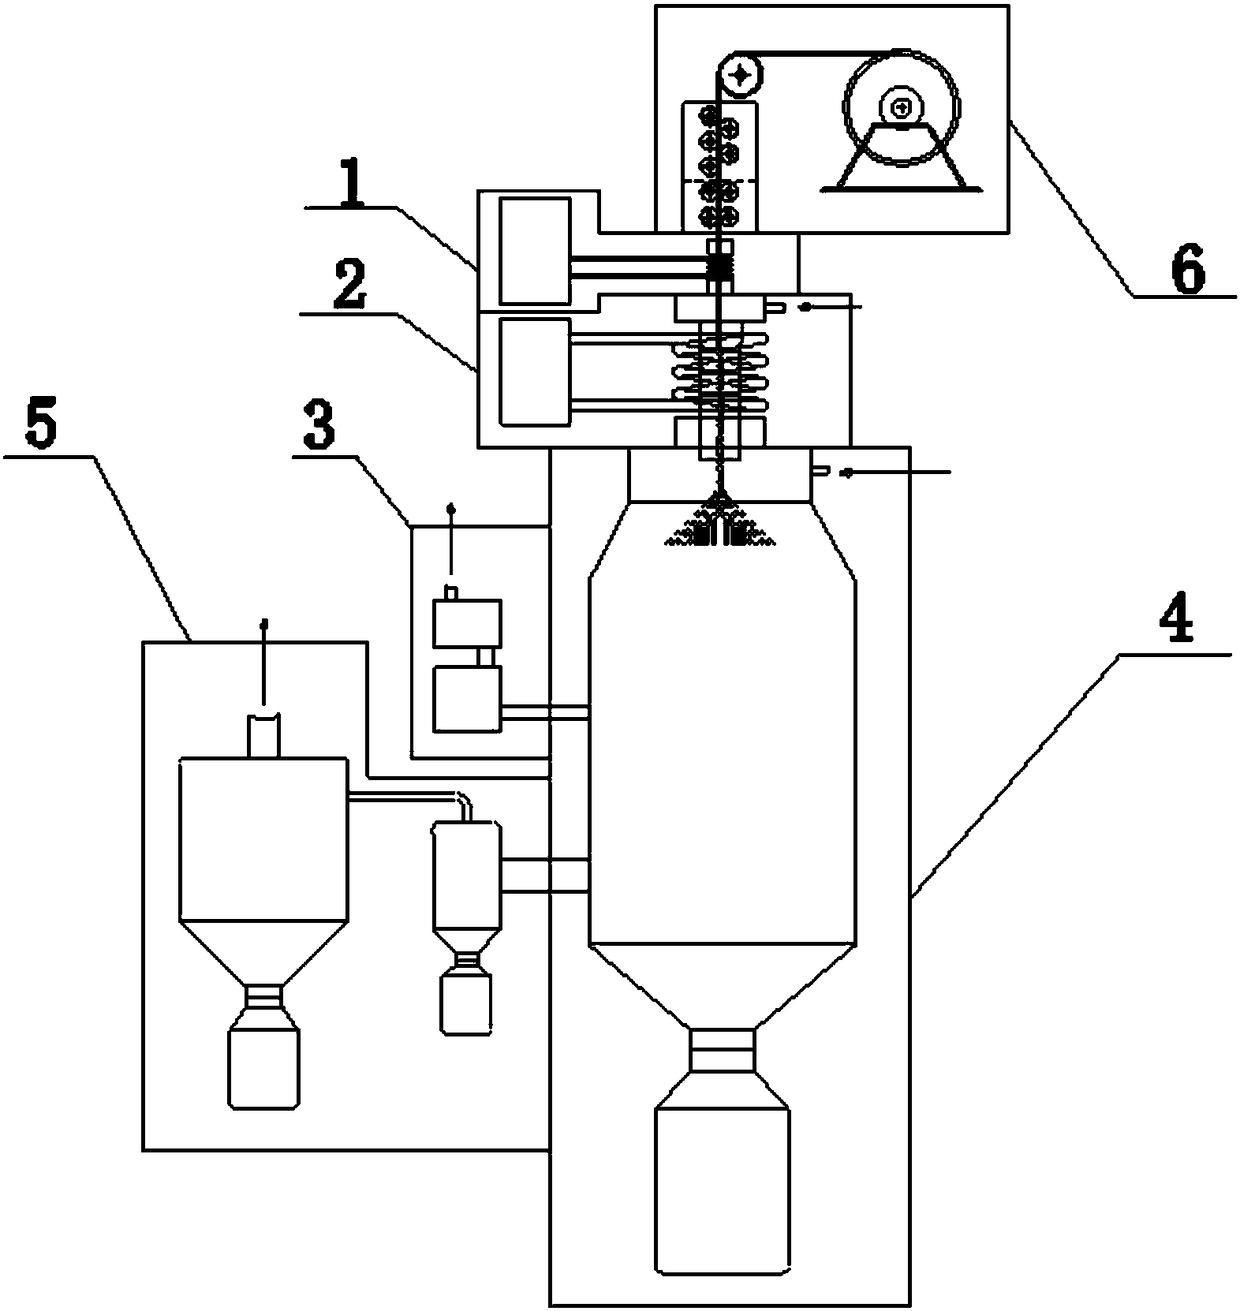 Powder preparation method for induction heating and radio frequency plasma combined atomizing powder system